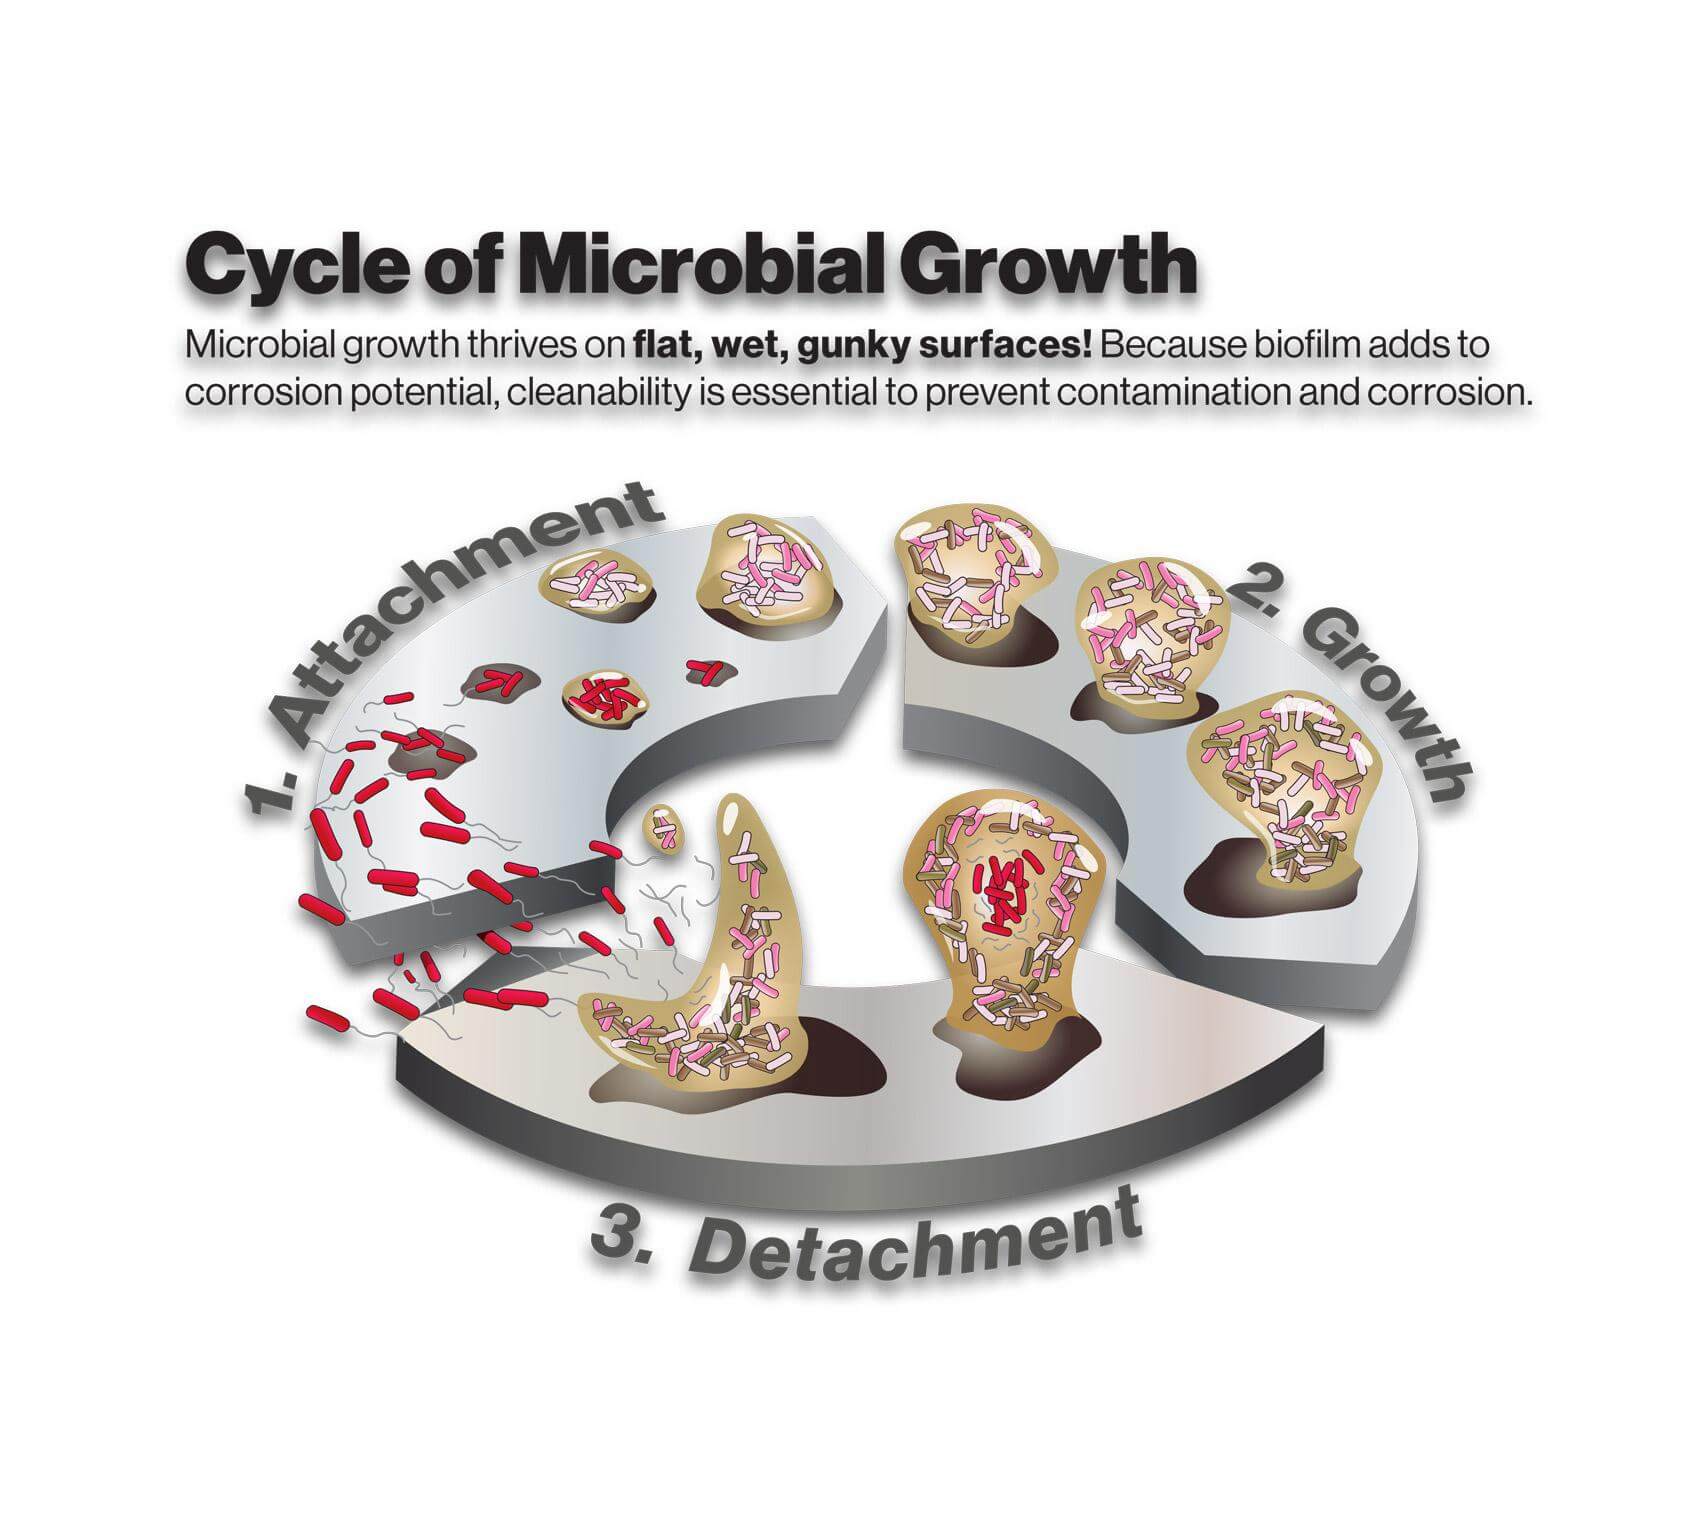 Cycle of Microbial Growth Illustration